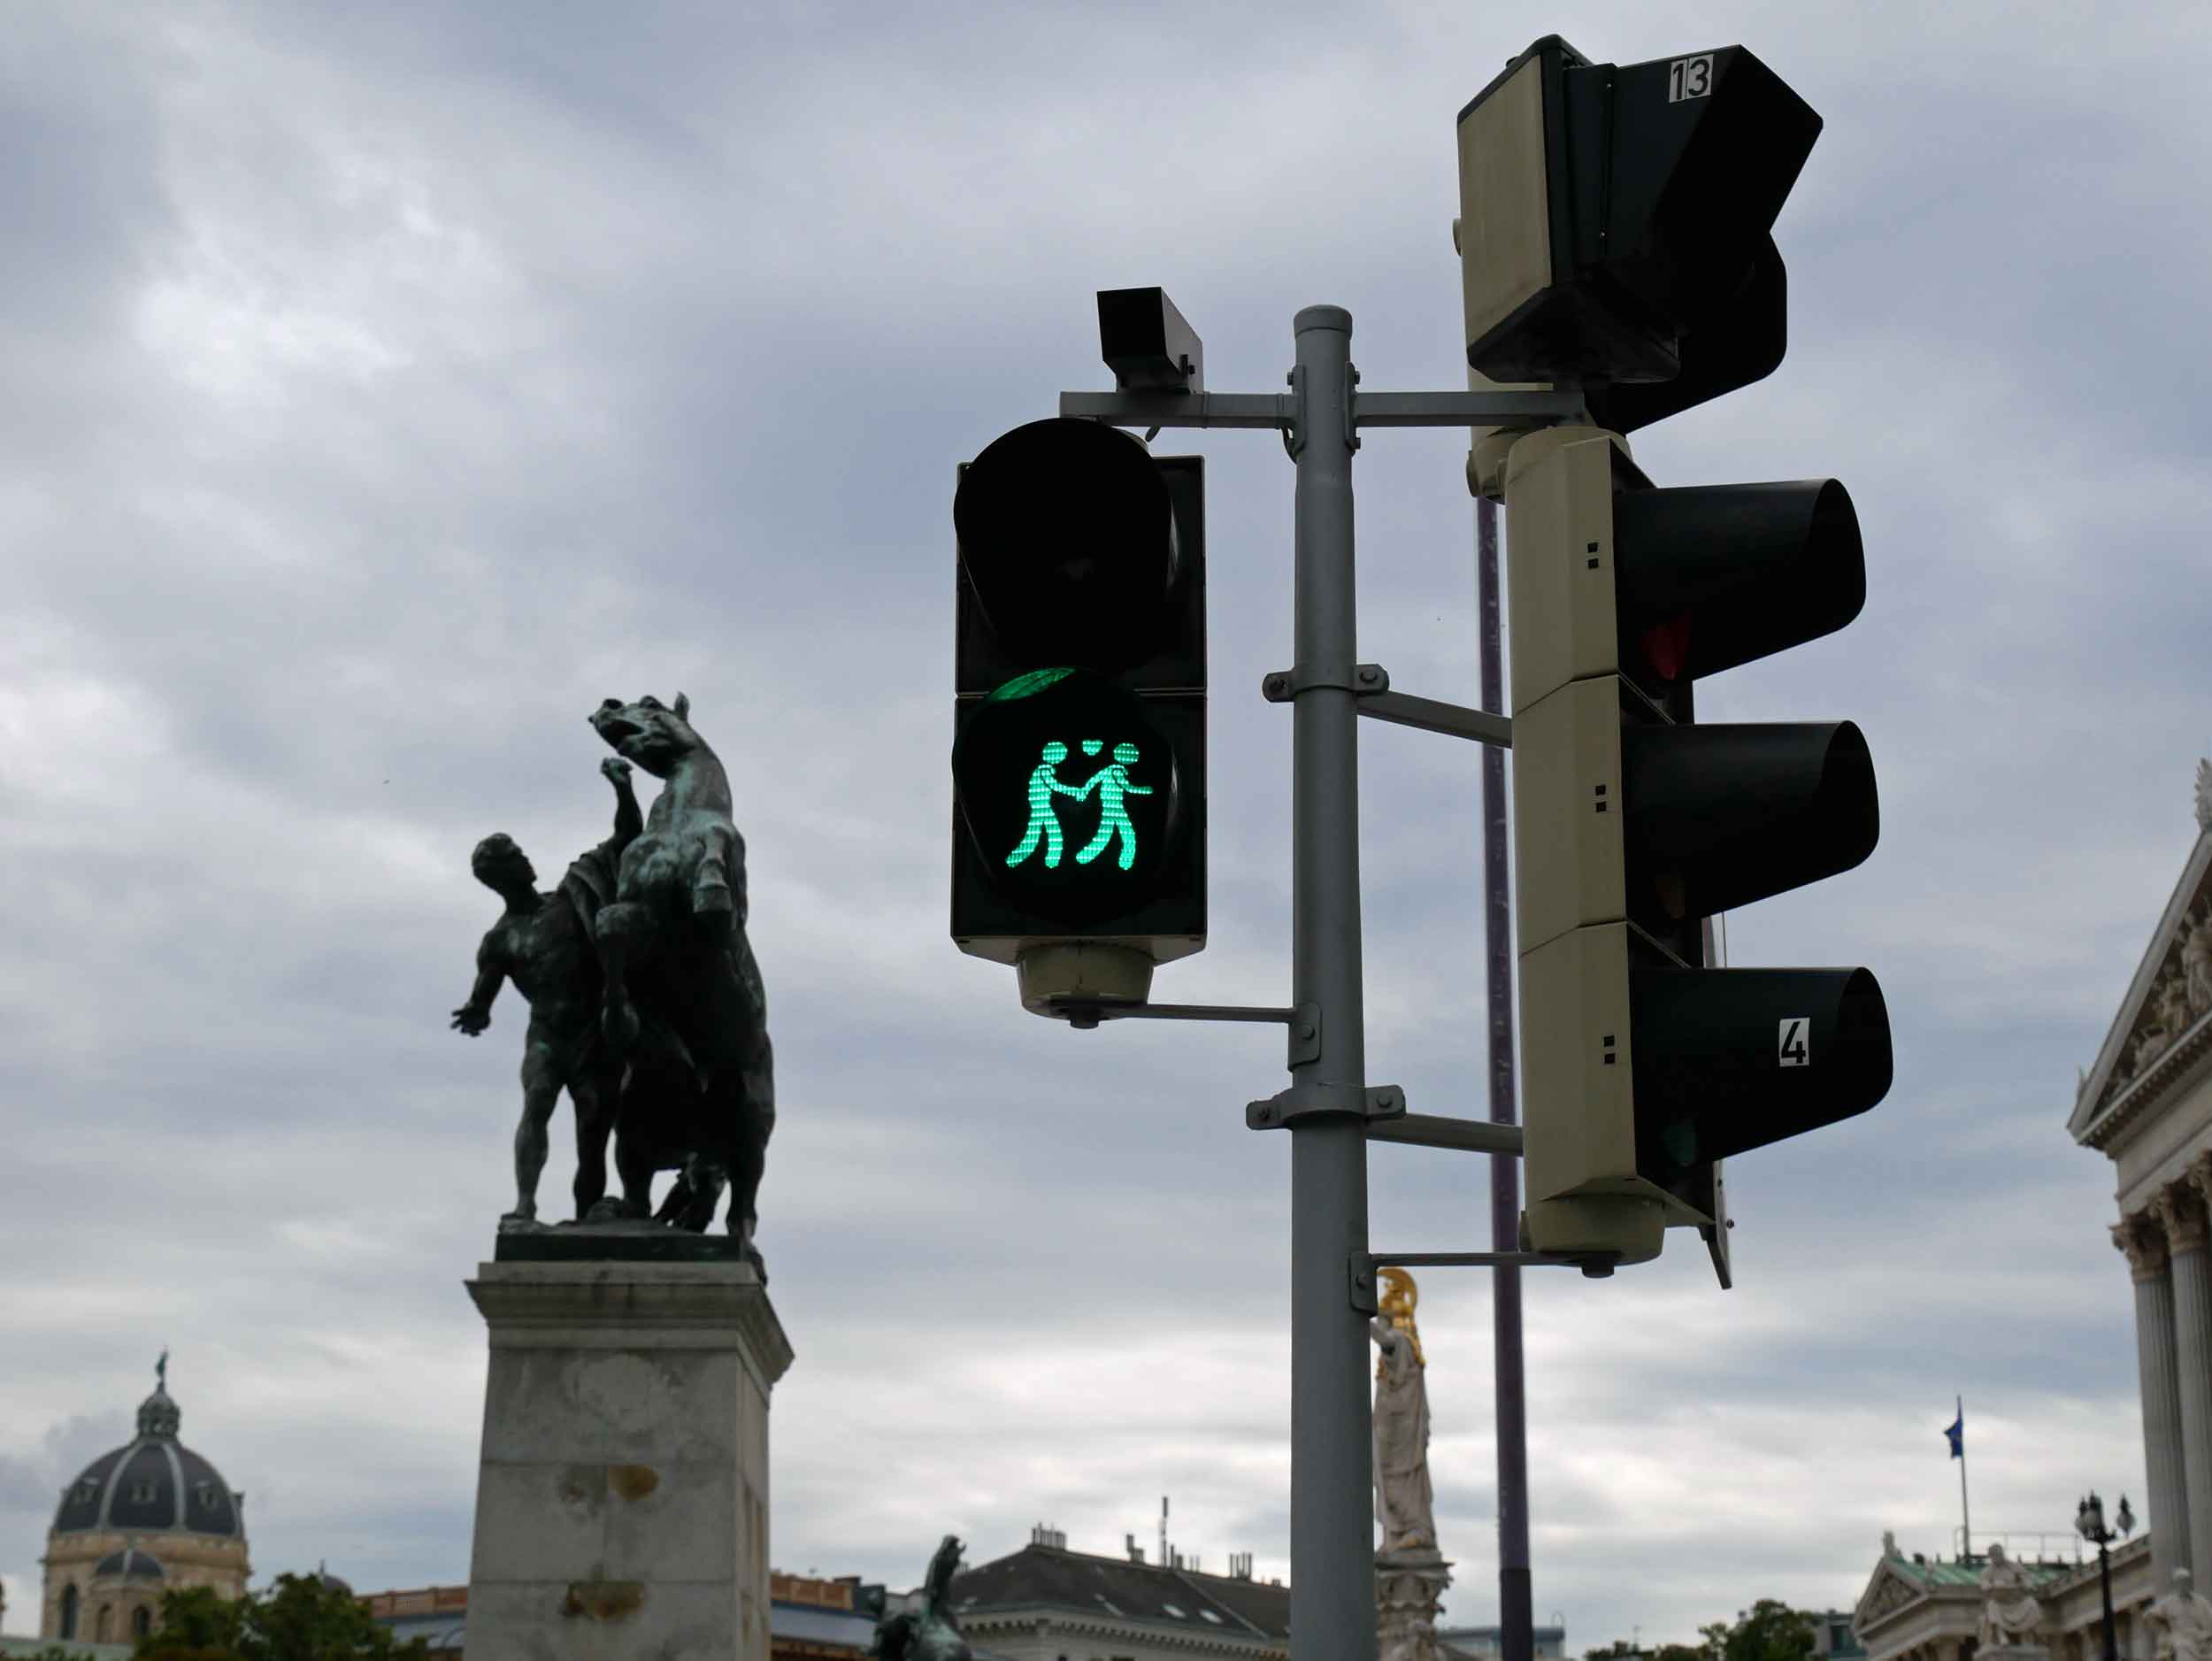  Gay, lesbian and straight couples adorn 120 crosswalk lights of Vienna, a sign of the city’s open-mindedness. 